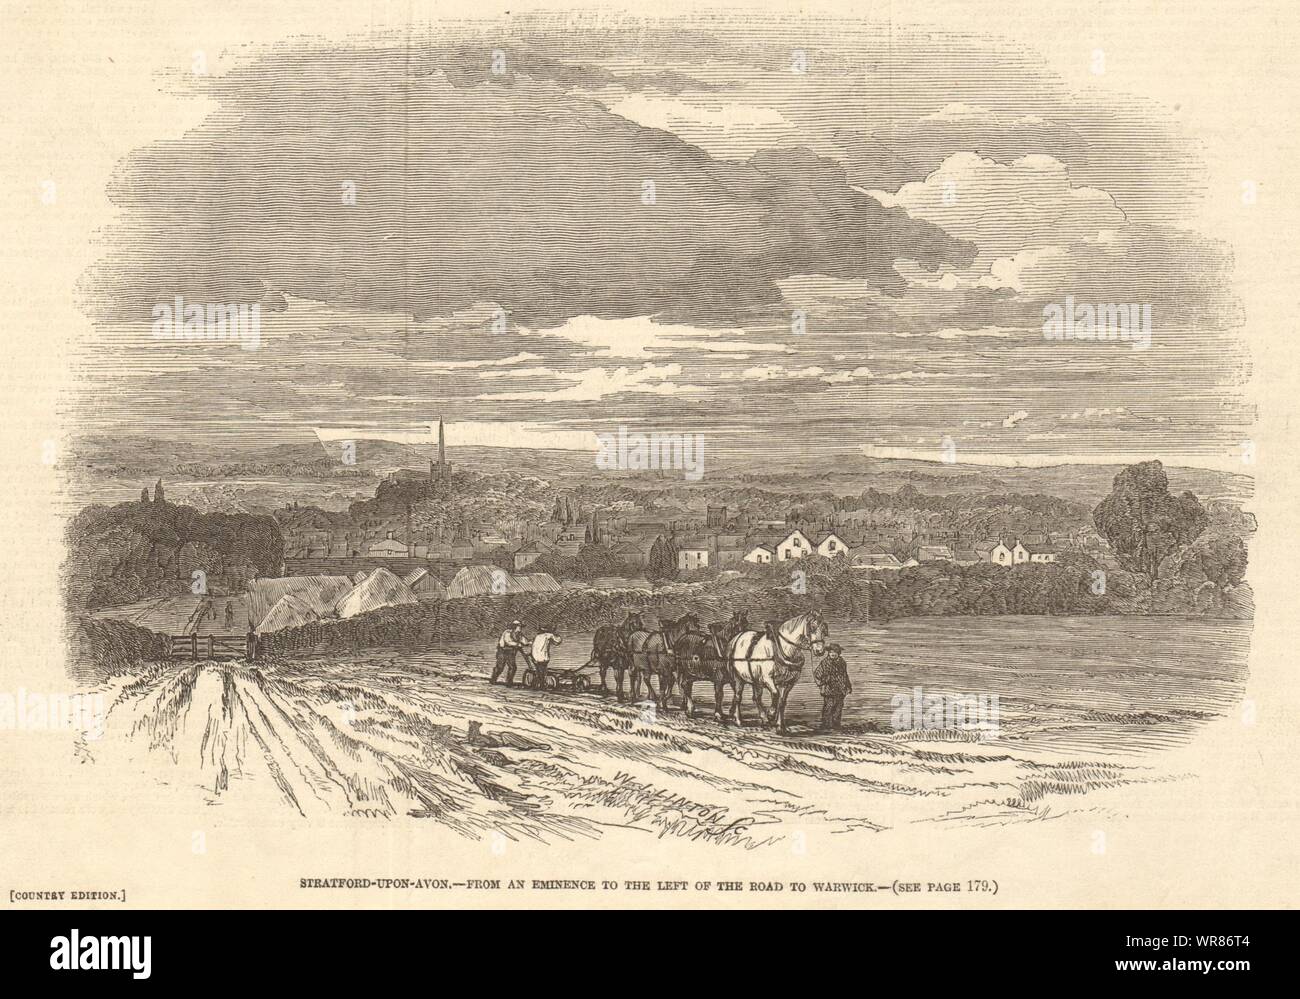 Stratford-upon-Avon - from the left of the road to Warwick. Warwickshire 1847 Stock Photo